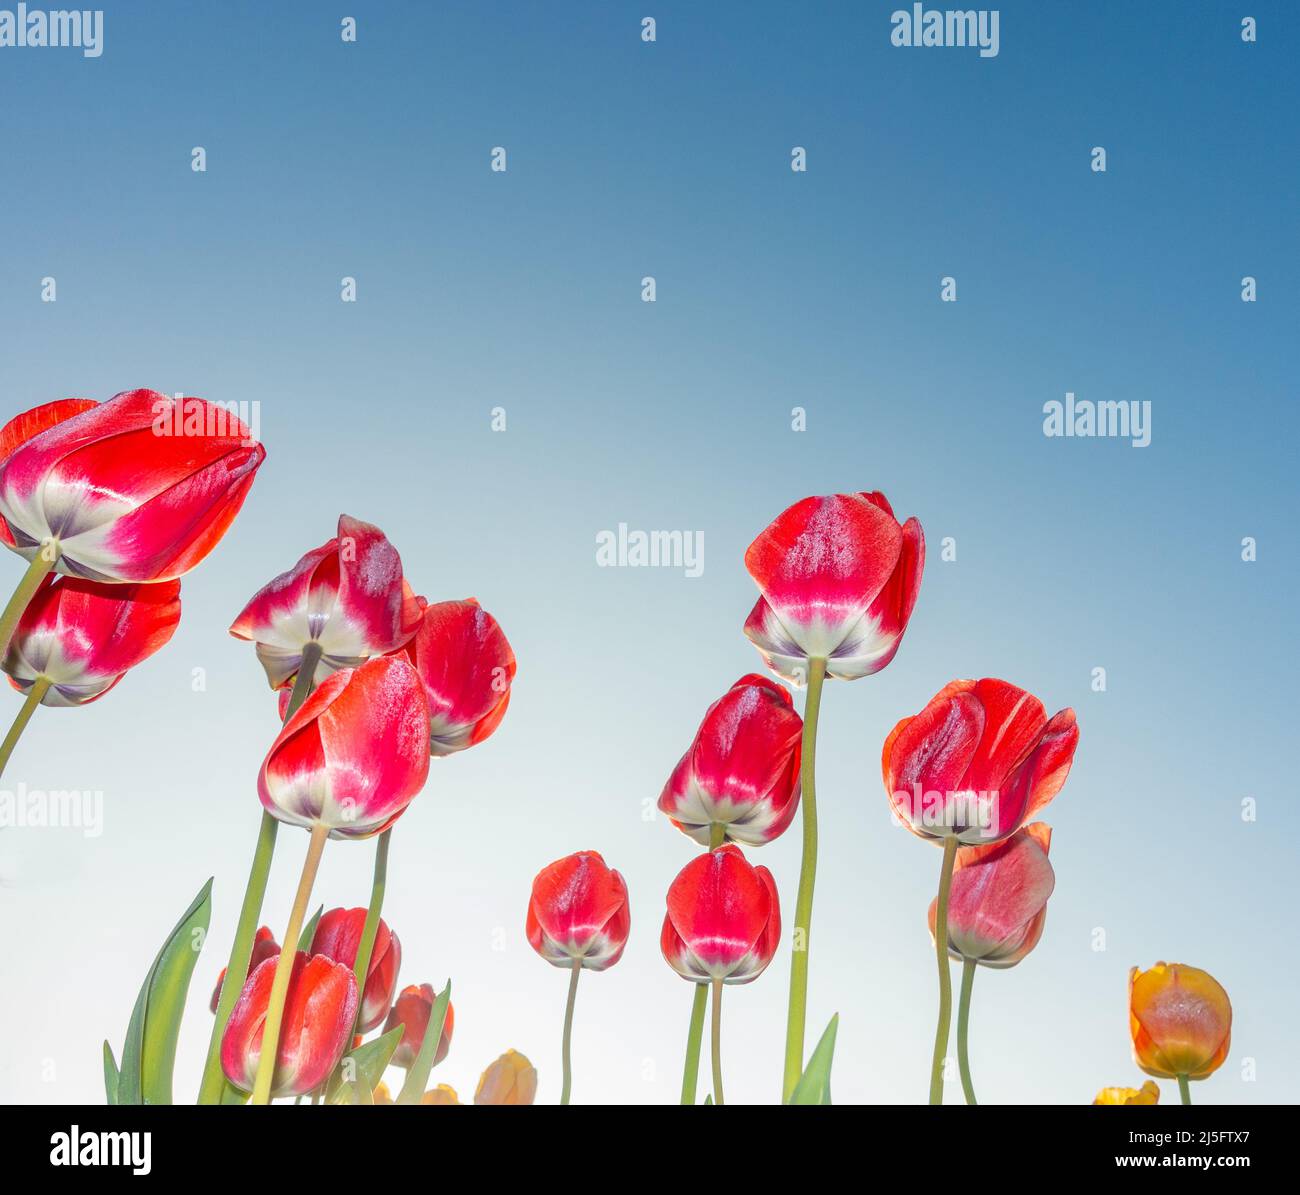 Red Tulips against a blue sky just after sunrise on a frosty spring morning. Frost visible on flowers Stock Photo